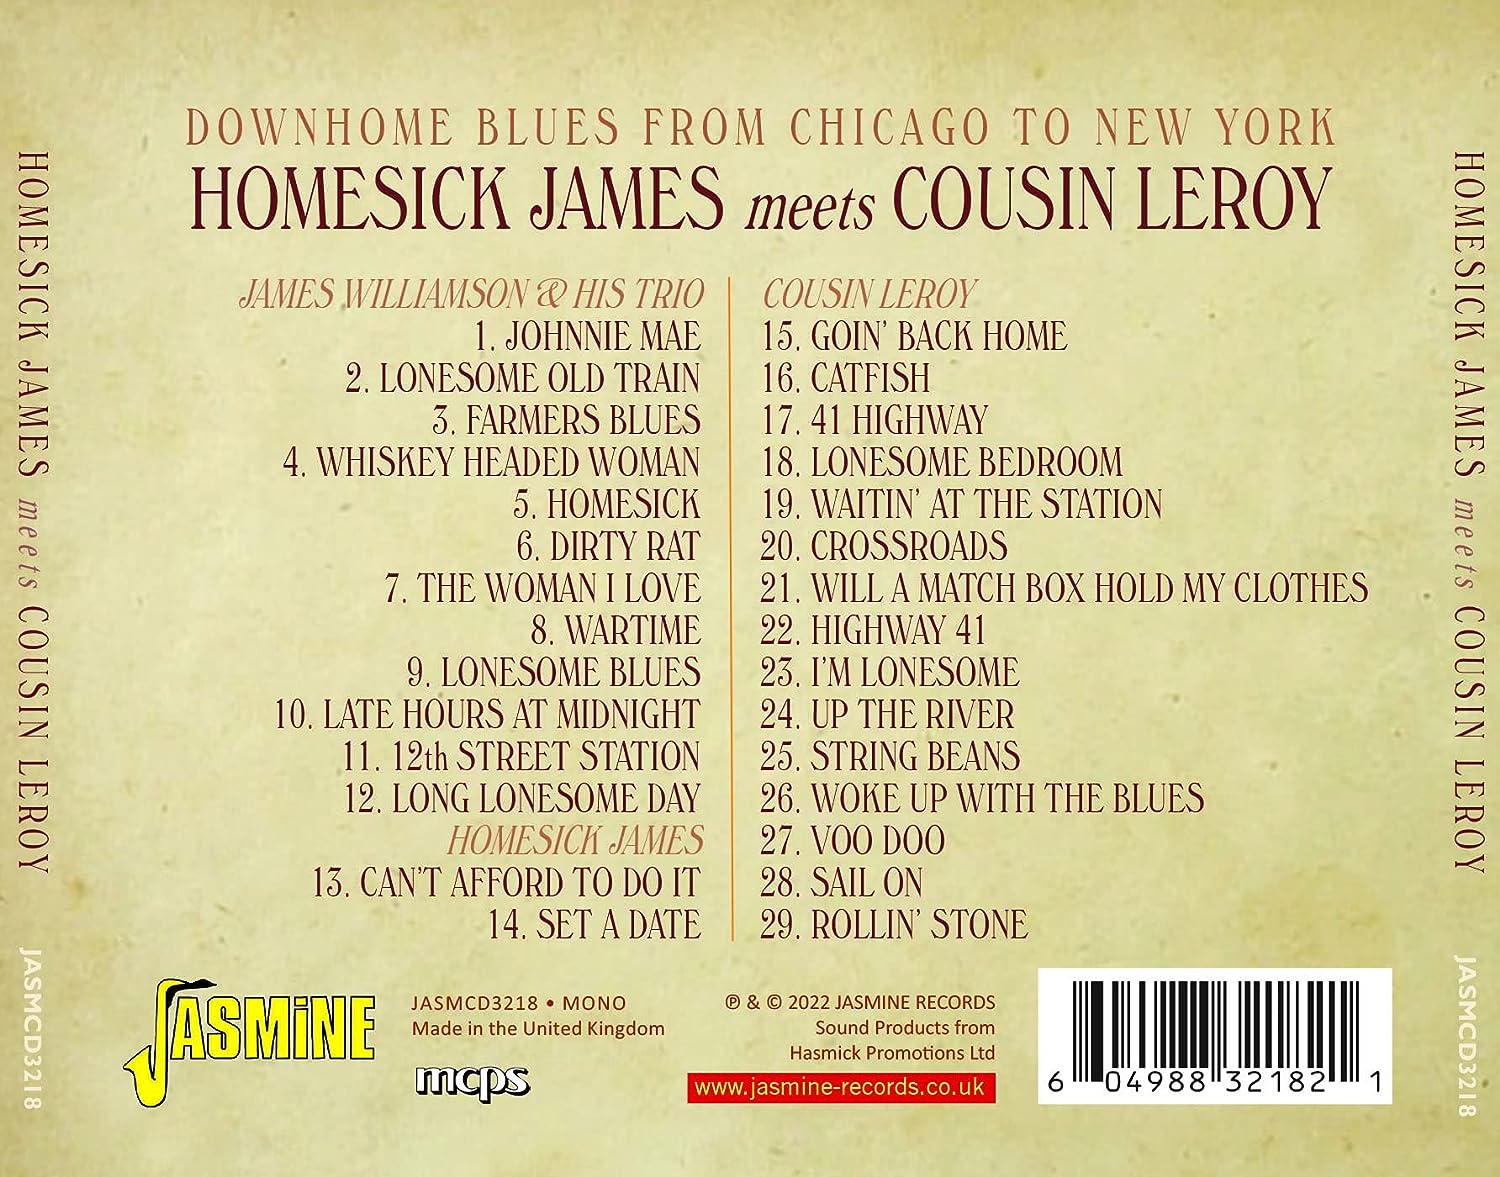 Homesick James Meets Cousin Leroy - Downhome Blues From Chicago To New York  - CD